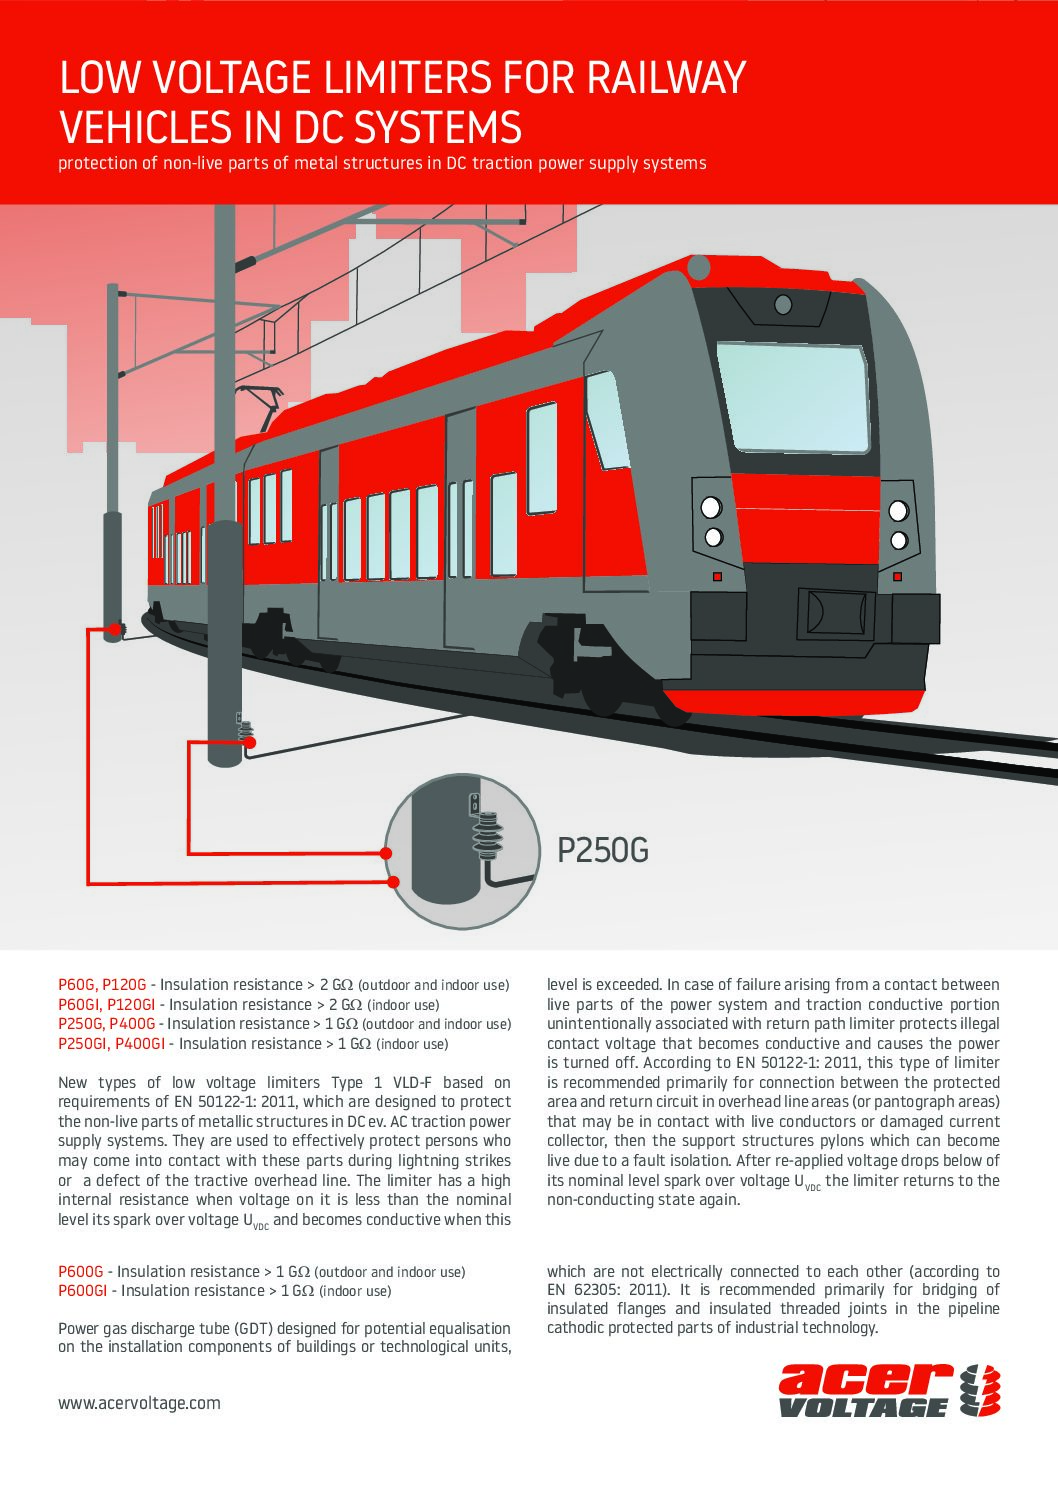 Low Voltage Limiters for Railway Vehicles in DC Systems